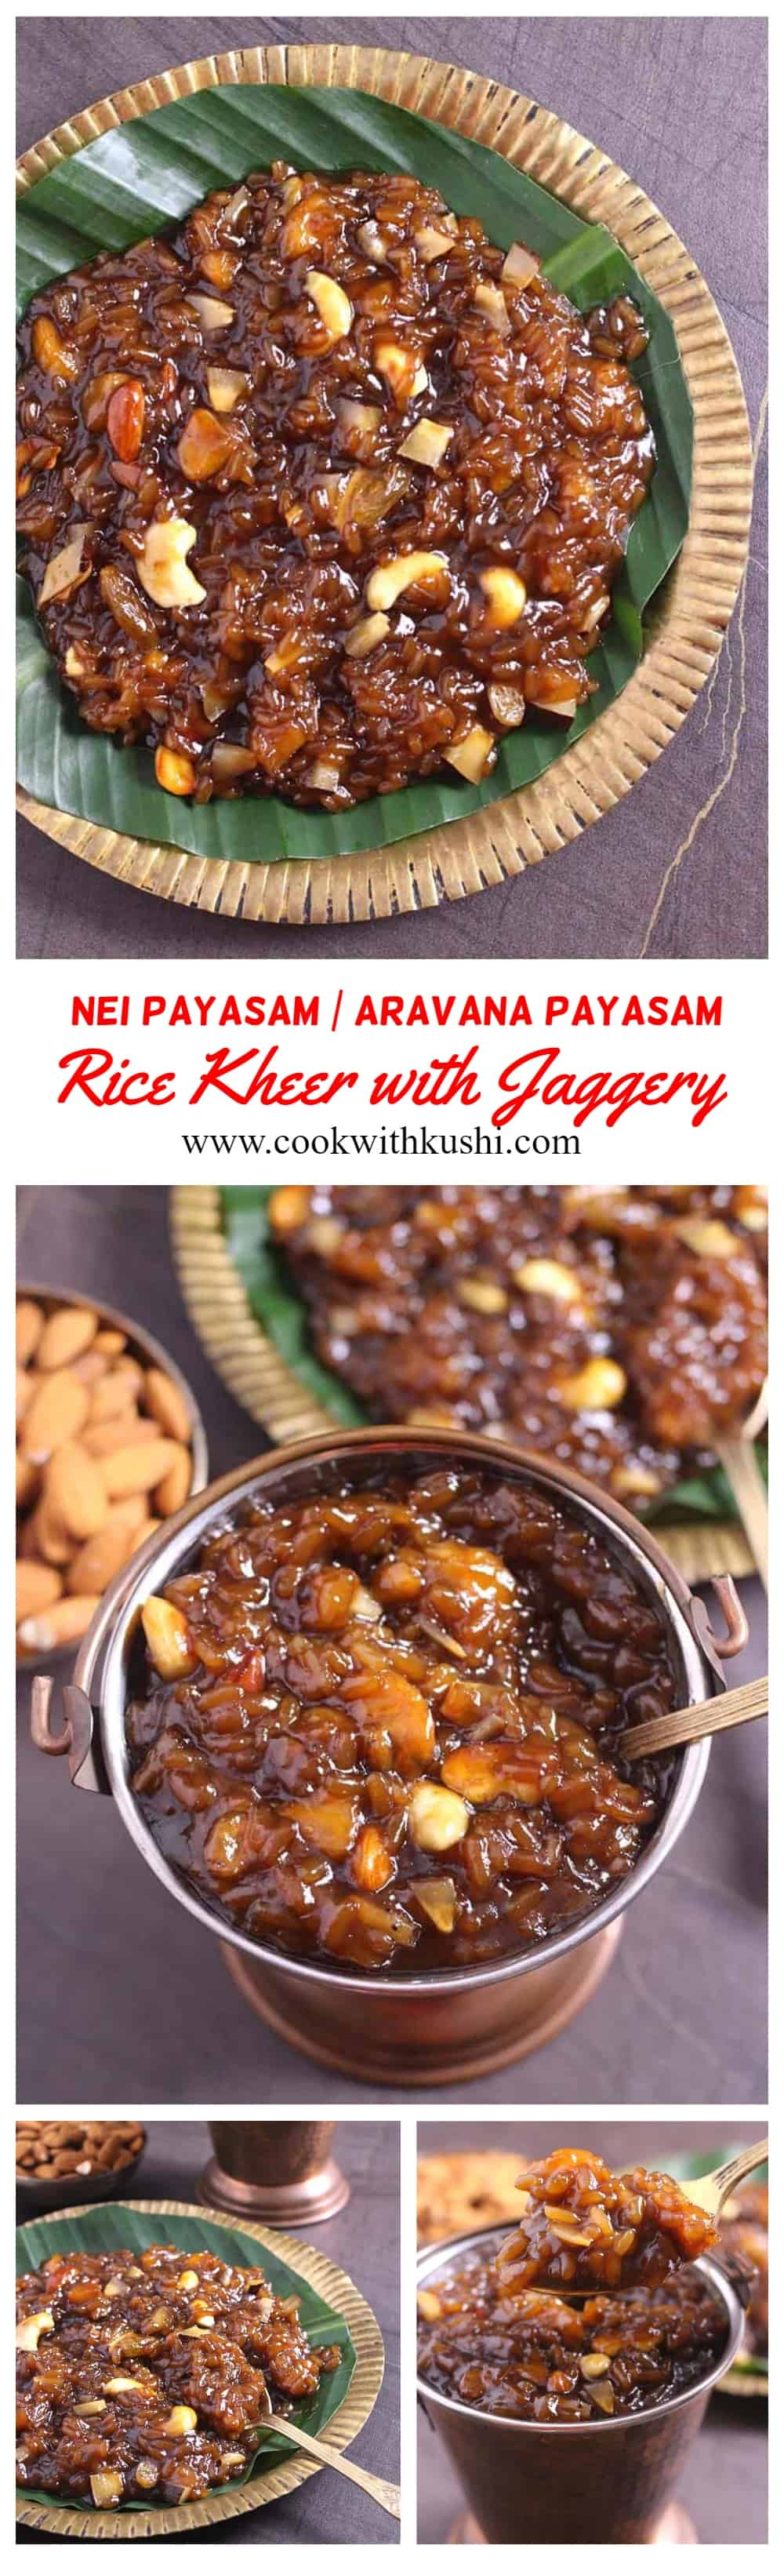 Temple Style Nei Paysam is a popular recipe from Kerala offered as naivedyam or prasadam at Sabarimala. The flavor in this kheer comes from the cooked rice #kheer #payasam #redrice #Indiansweets